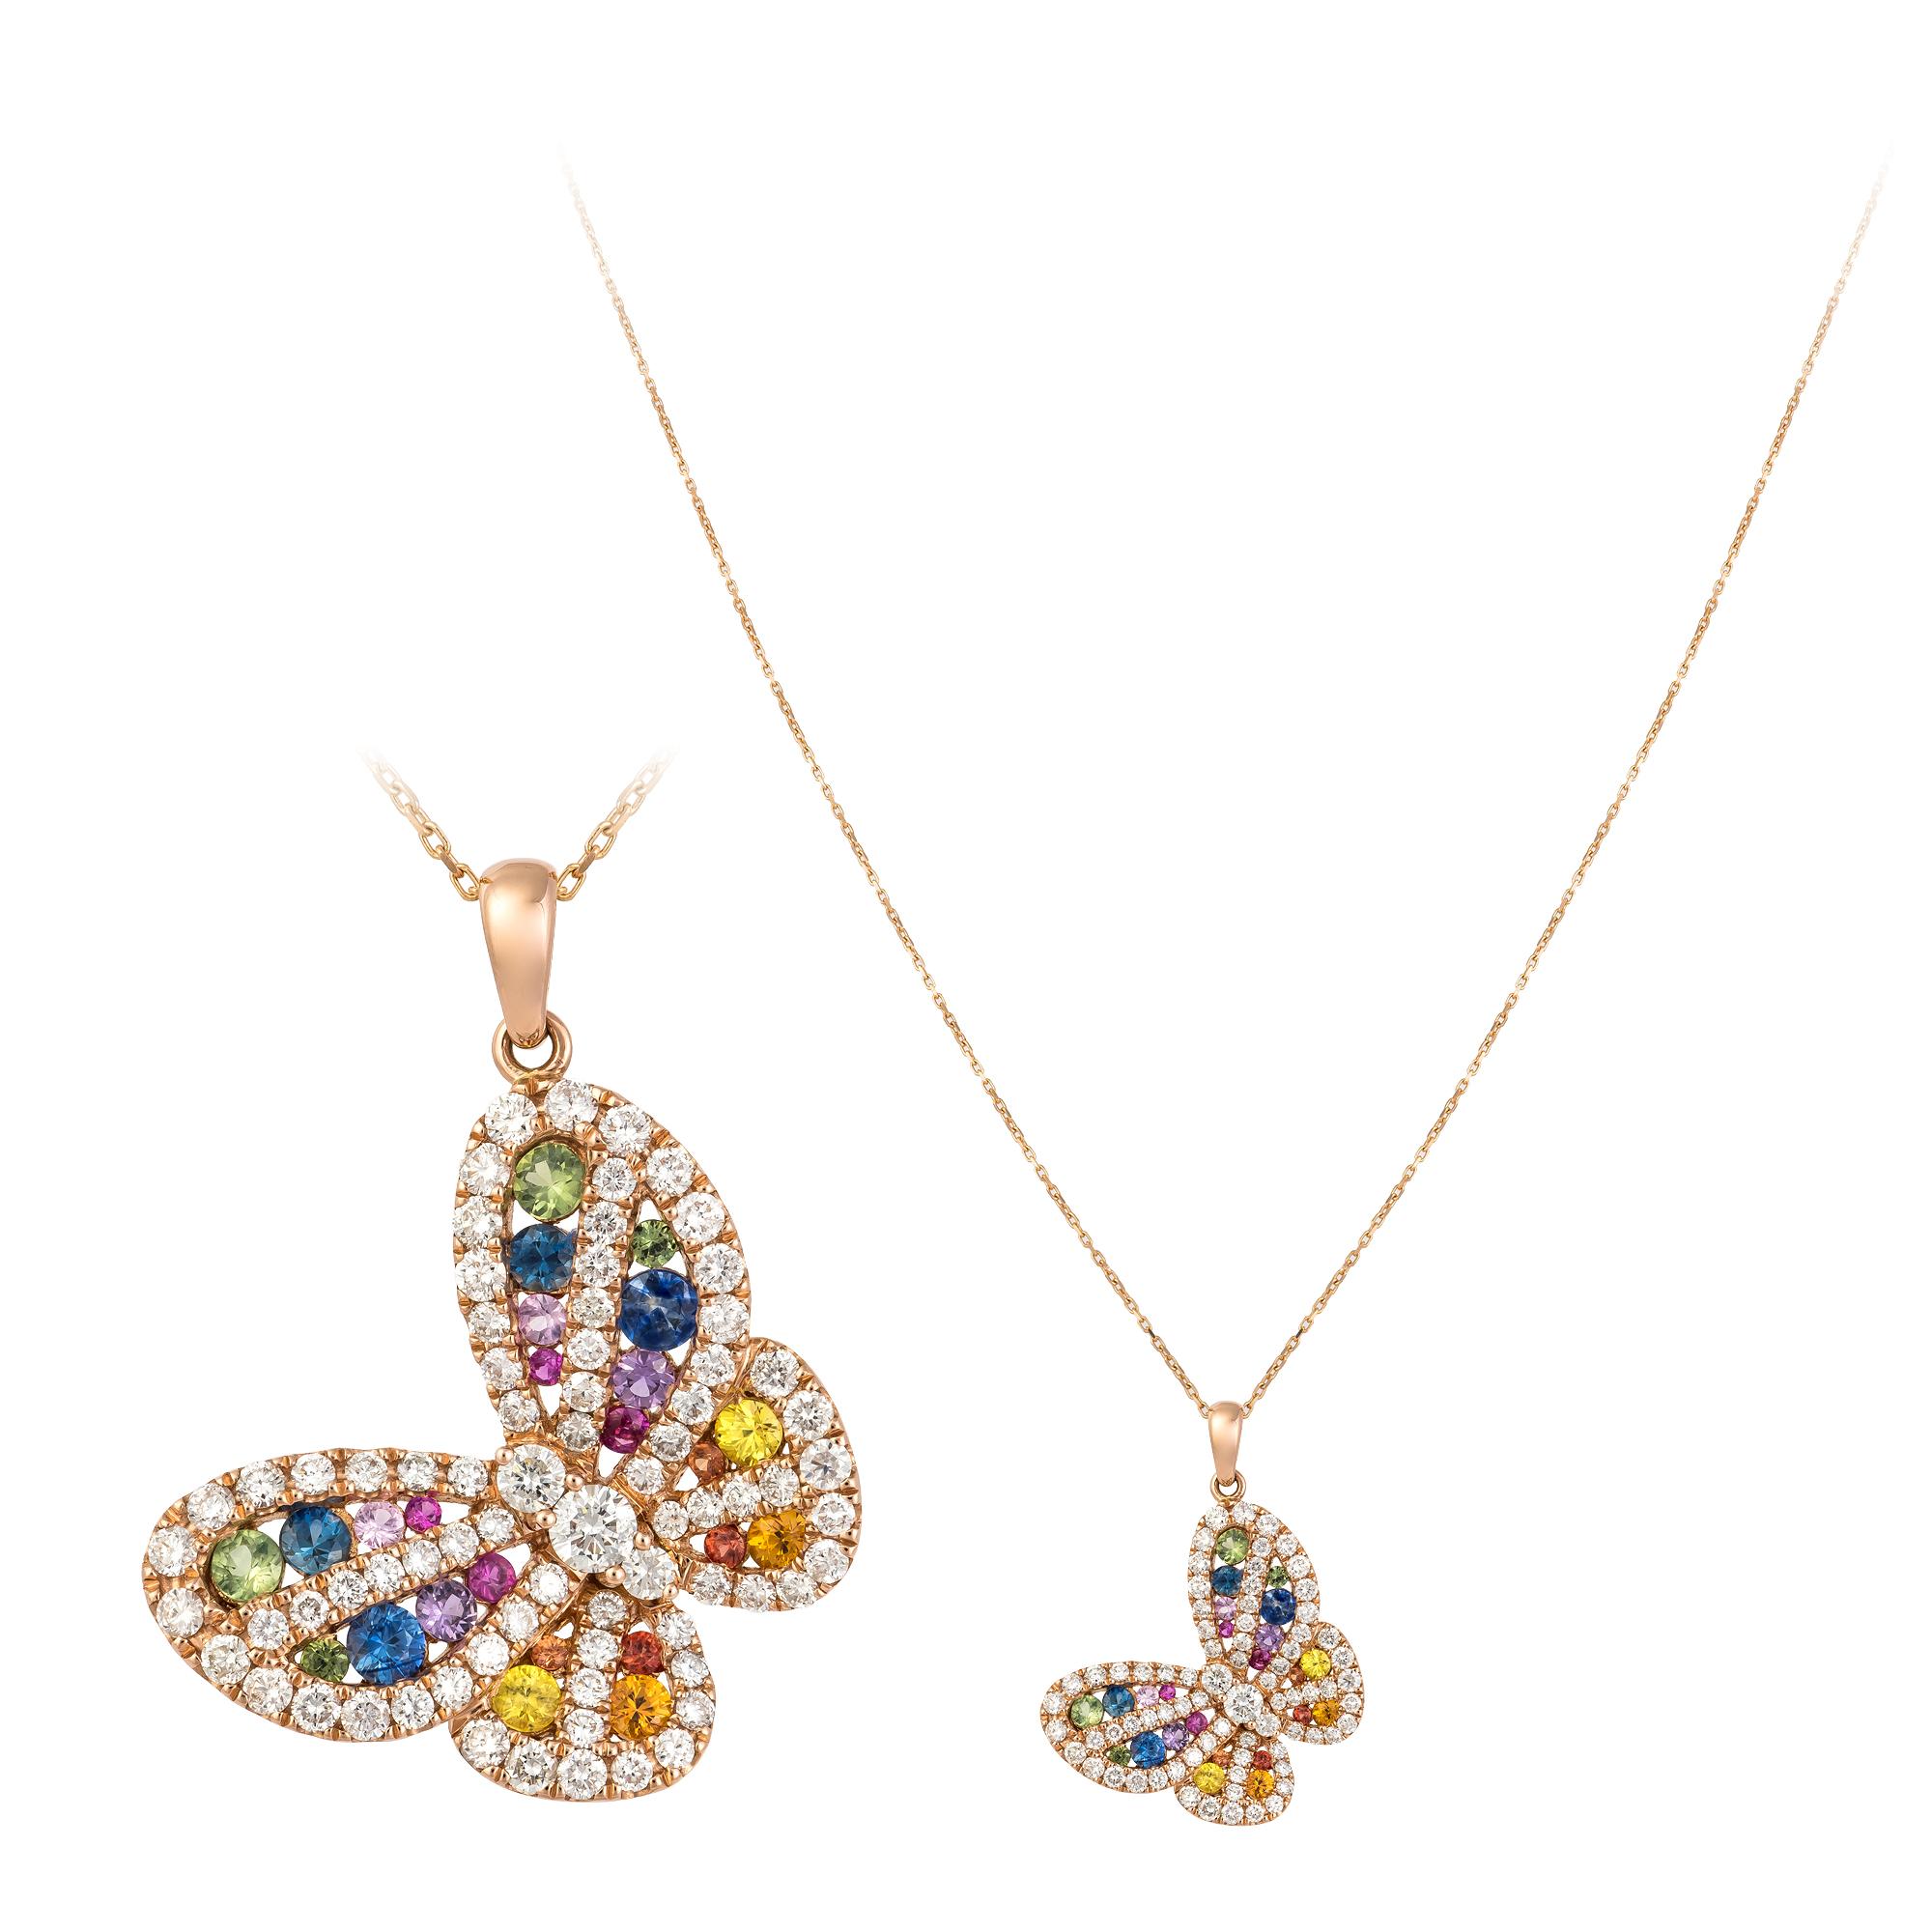 Necklace Rose Gold 18 K 
Diamonds 1.78 Cts/75 Pcs
Multi Sapphire 1.32 Cts/24 Pcs

Weight 8,47 grams
Length 42 cm (Adjustable=)

With a heritage of ancient fine Swiss jewelry traditions, NATKINA is a Geneva based jewellery brand, which creates modern